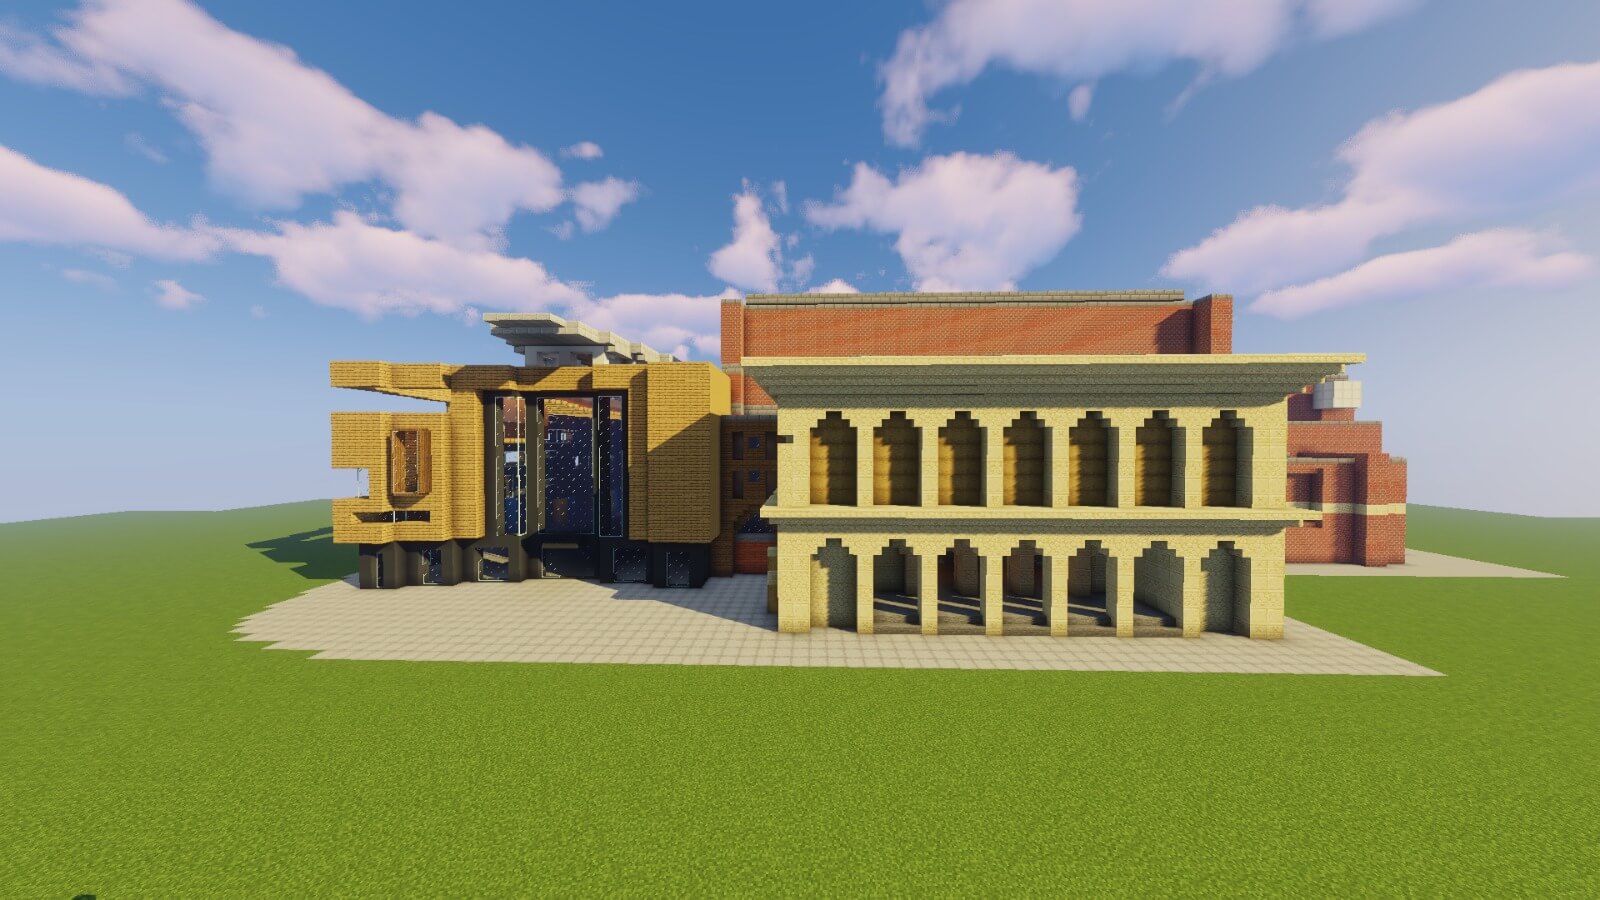 Exterior view of the Minecraft Colston Hall